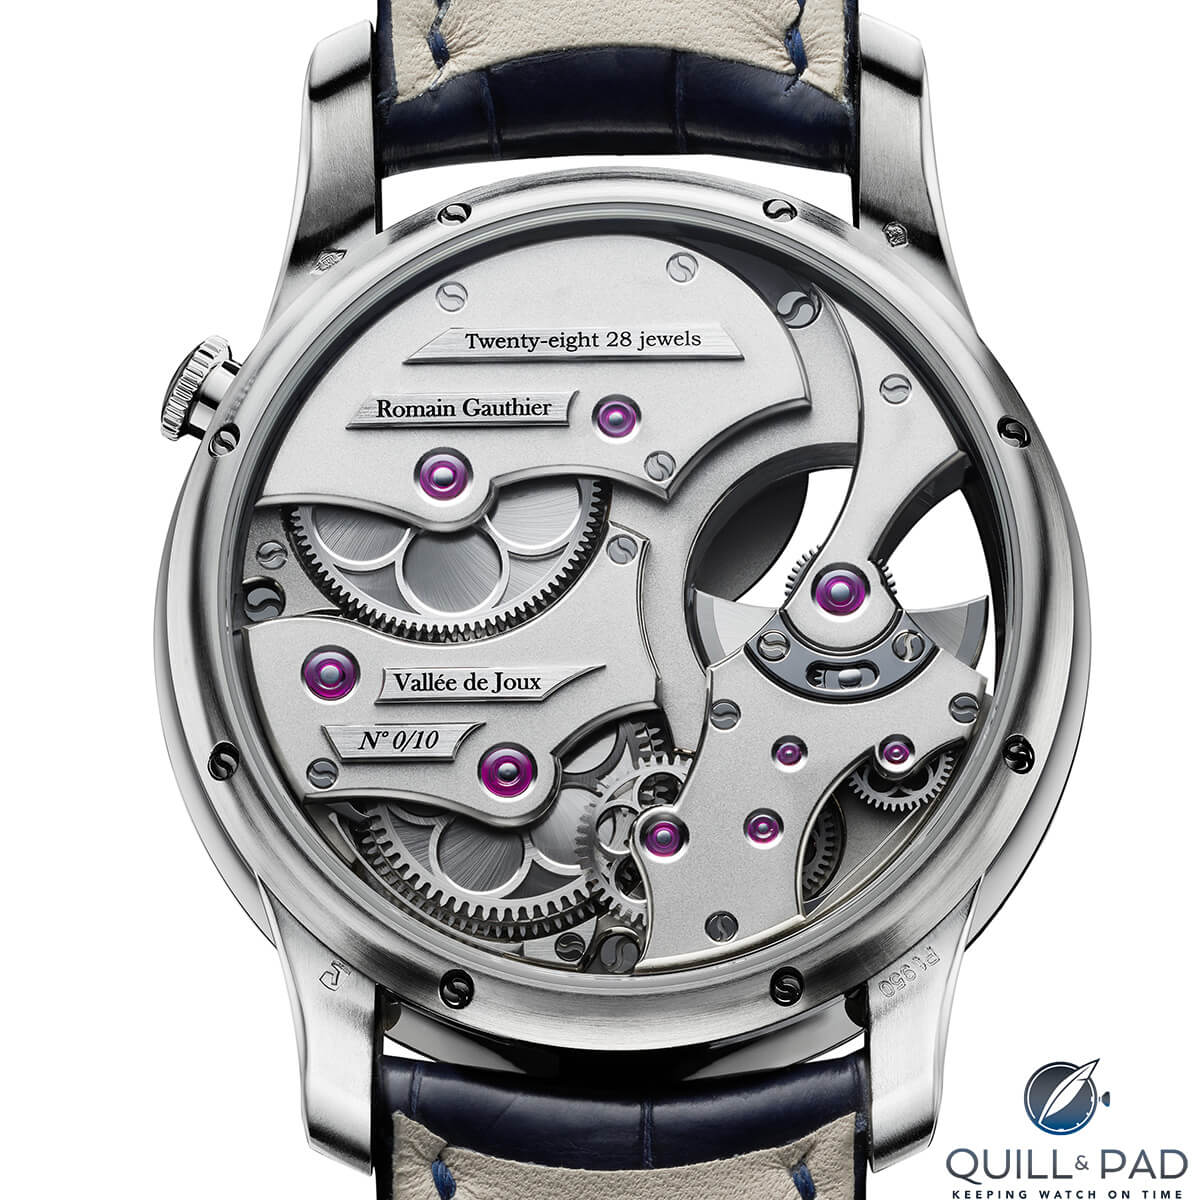 View through the display back of a limited edition platinum Romain Gauthier Insight micro-rotor